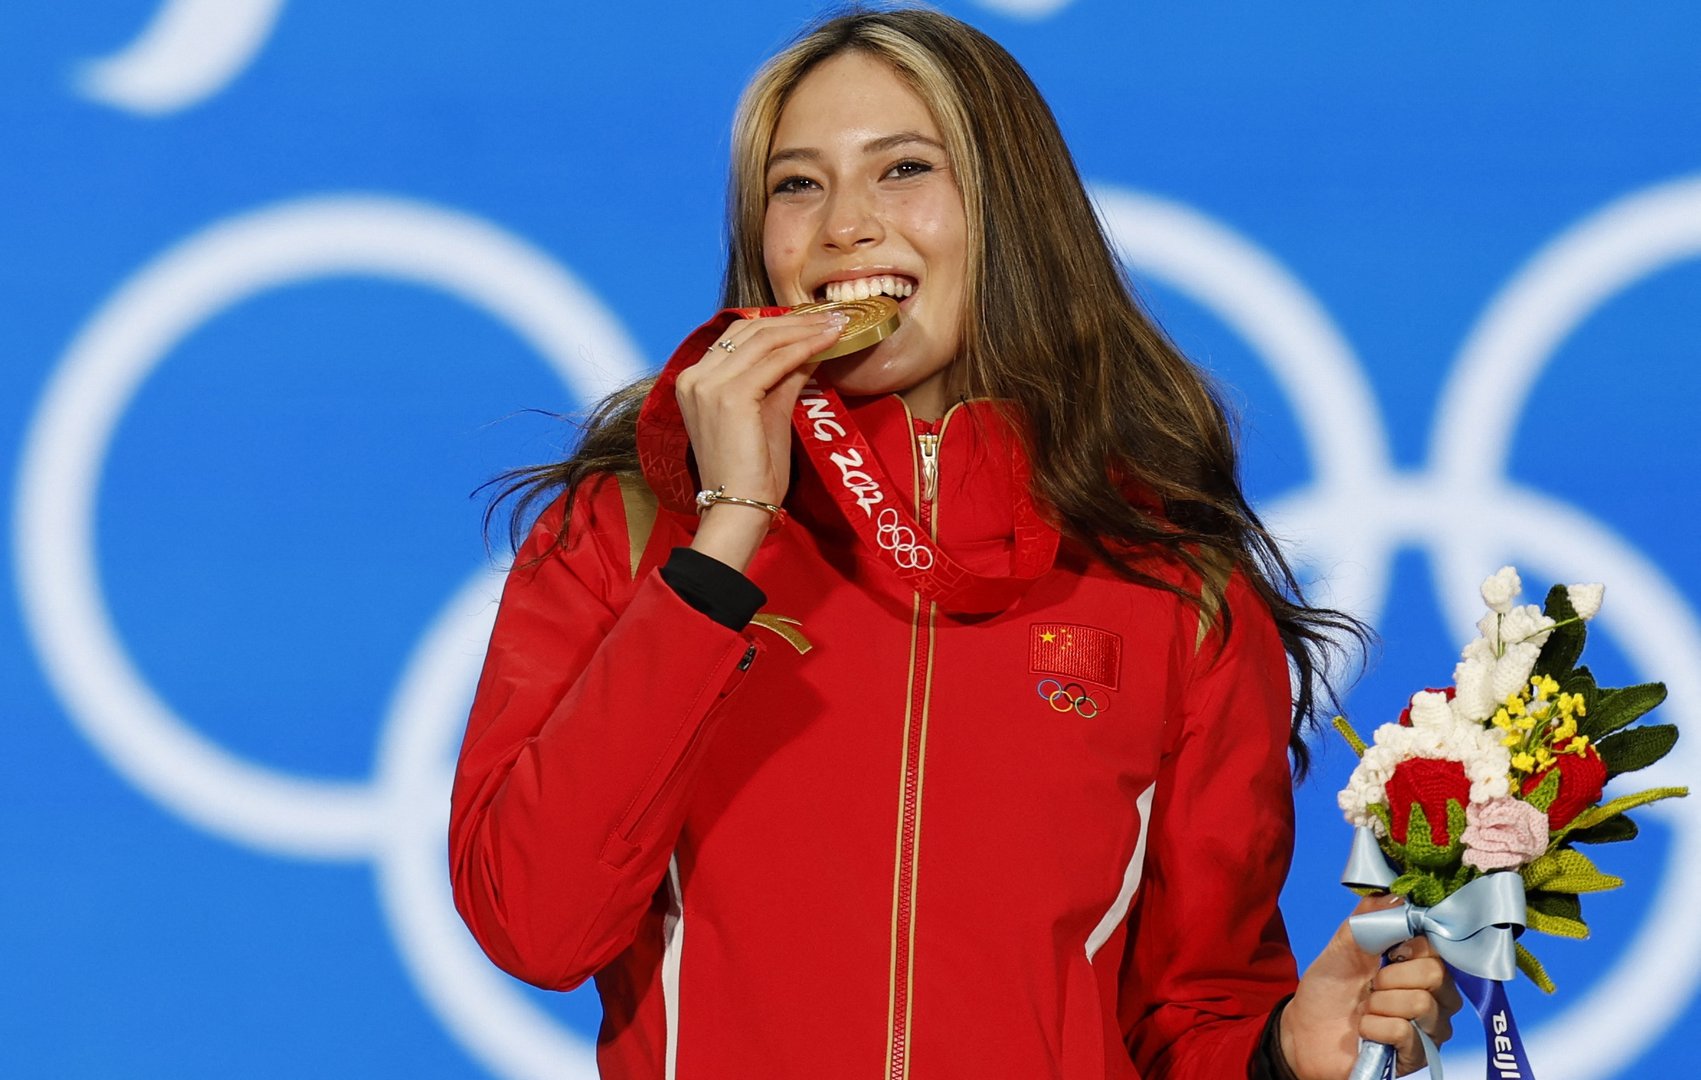 image Beijing claims Gu as a daughter after golden day in China